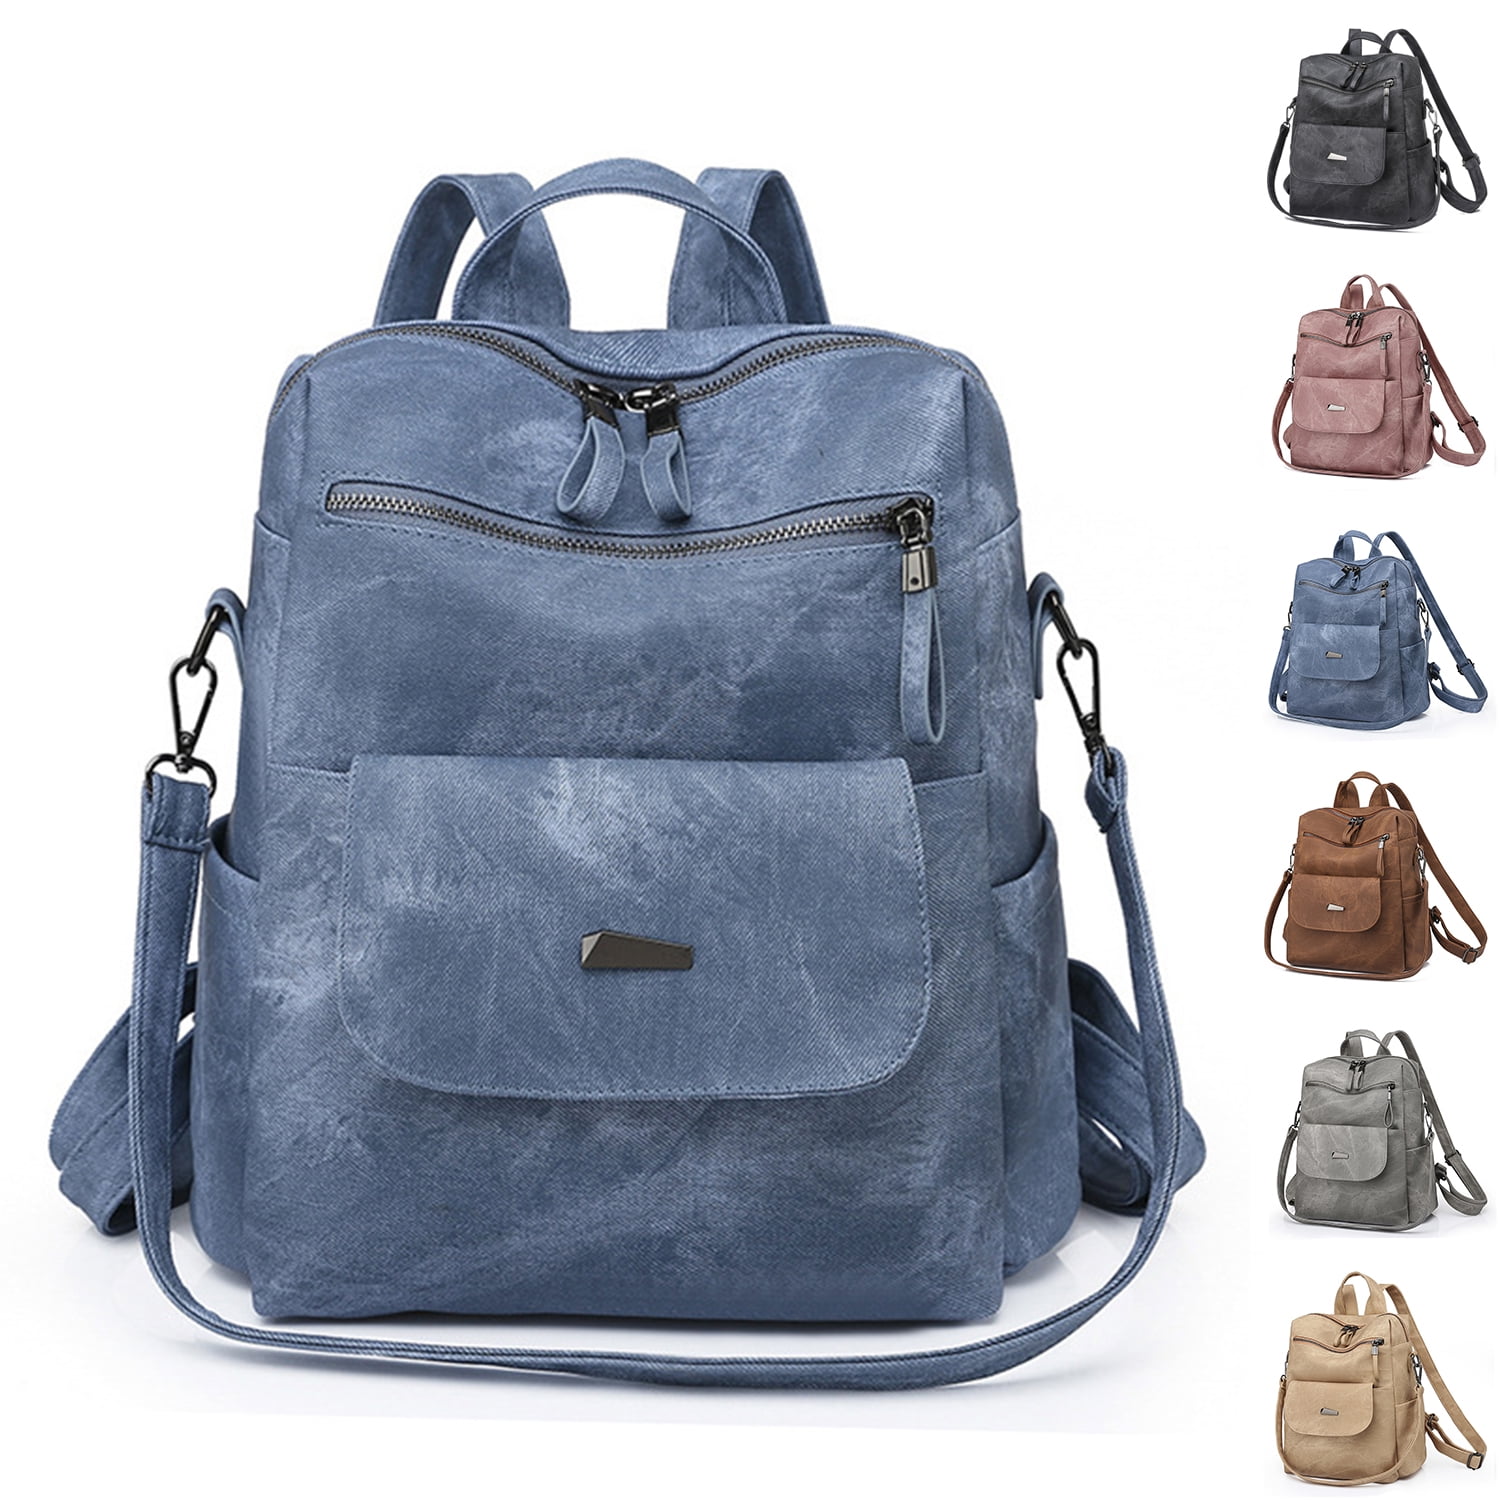 Best Women's Backpack: Recycled Fabric Mini Backpack | Ganapati Crafts Co.